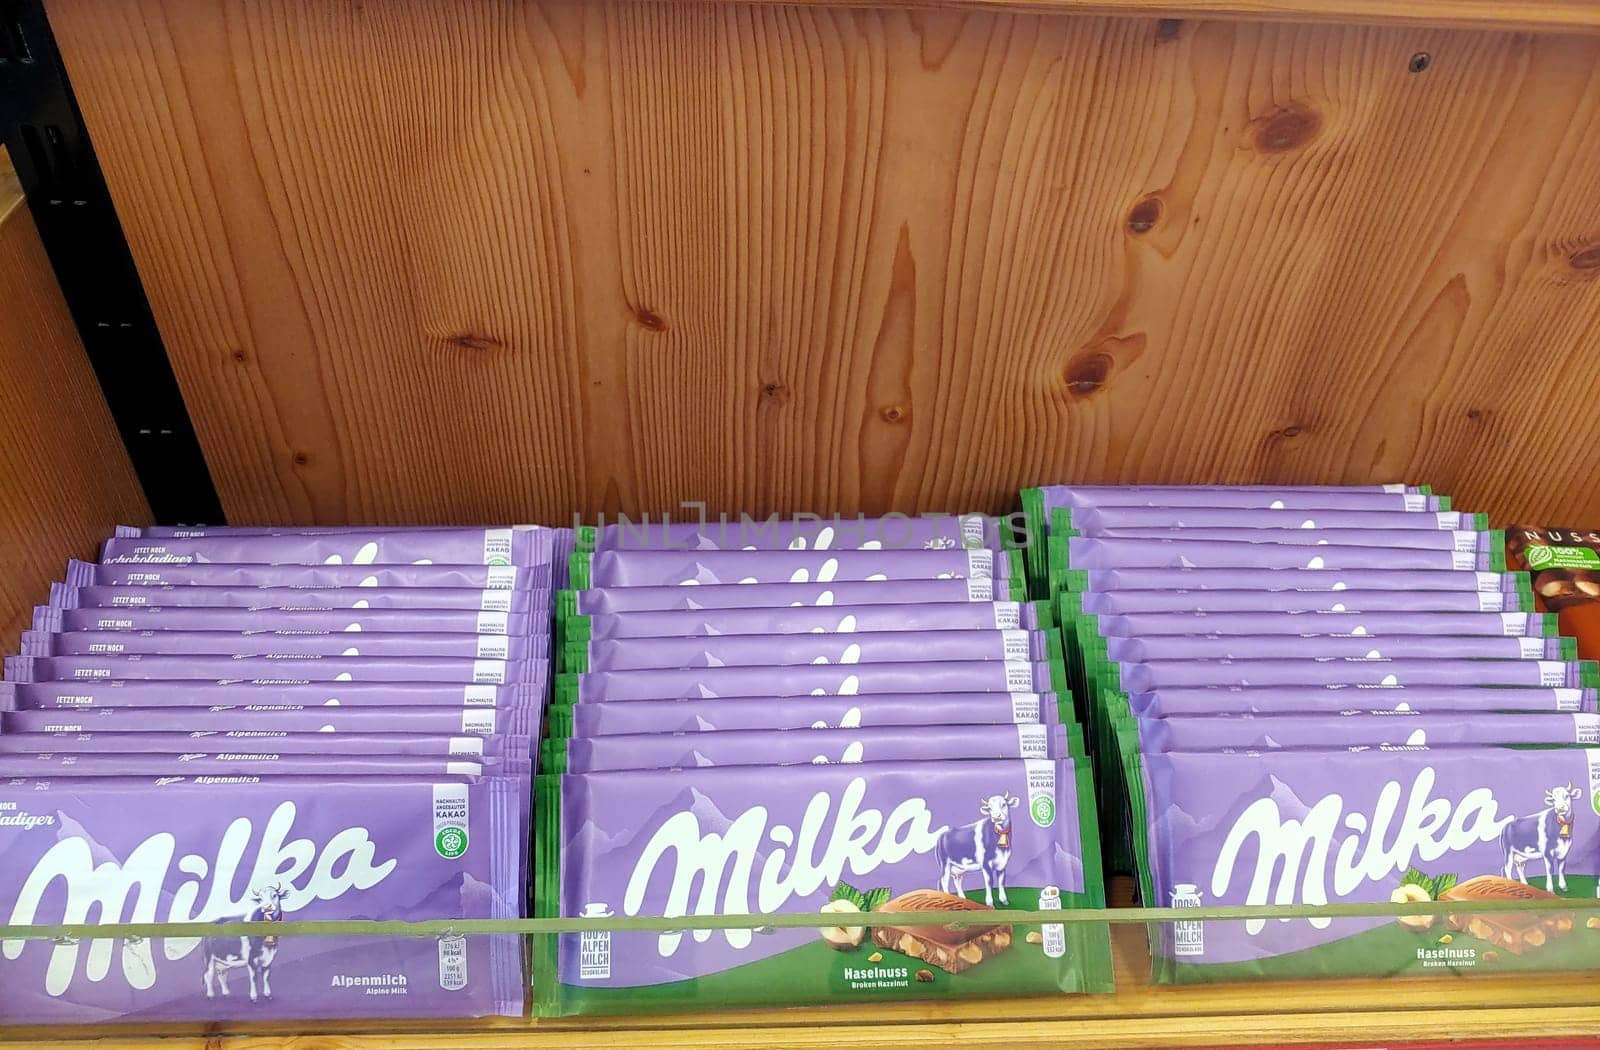 Shelves Stocked With Milka Chocolate Bars in a Grocery Store by okskukuruza